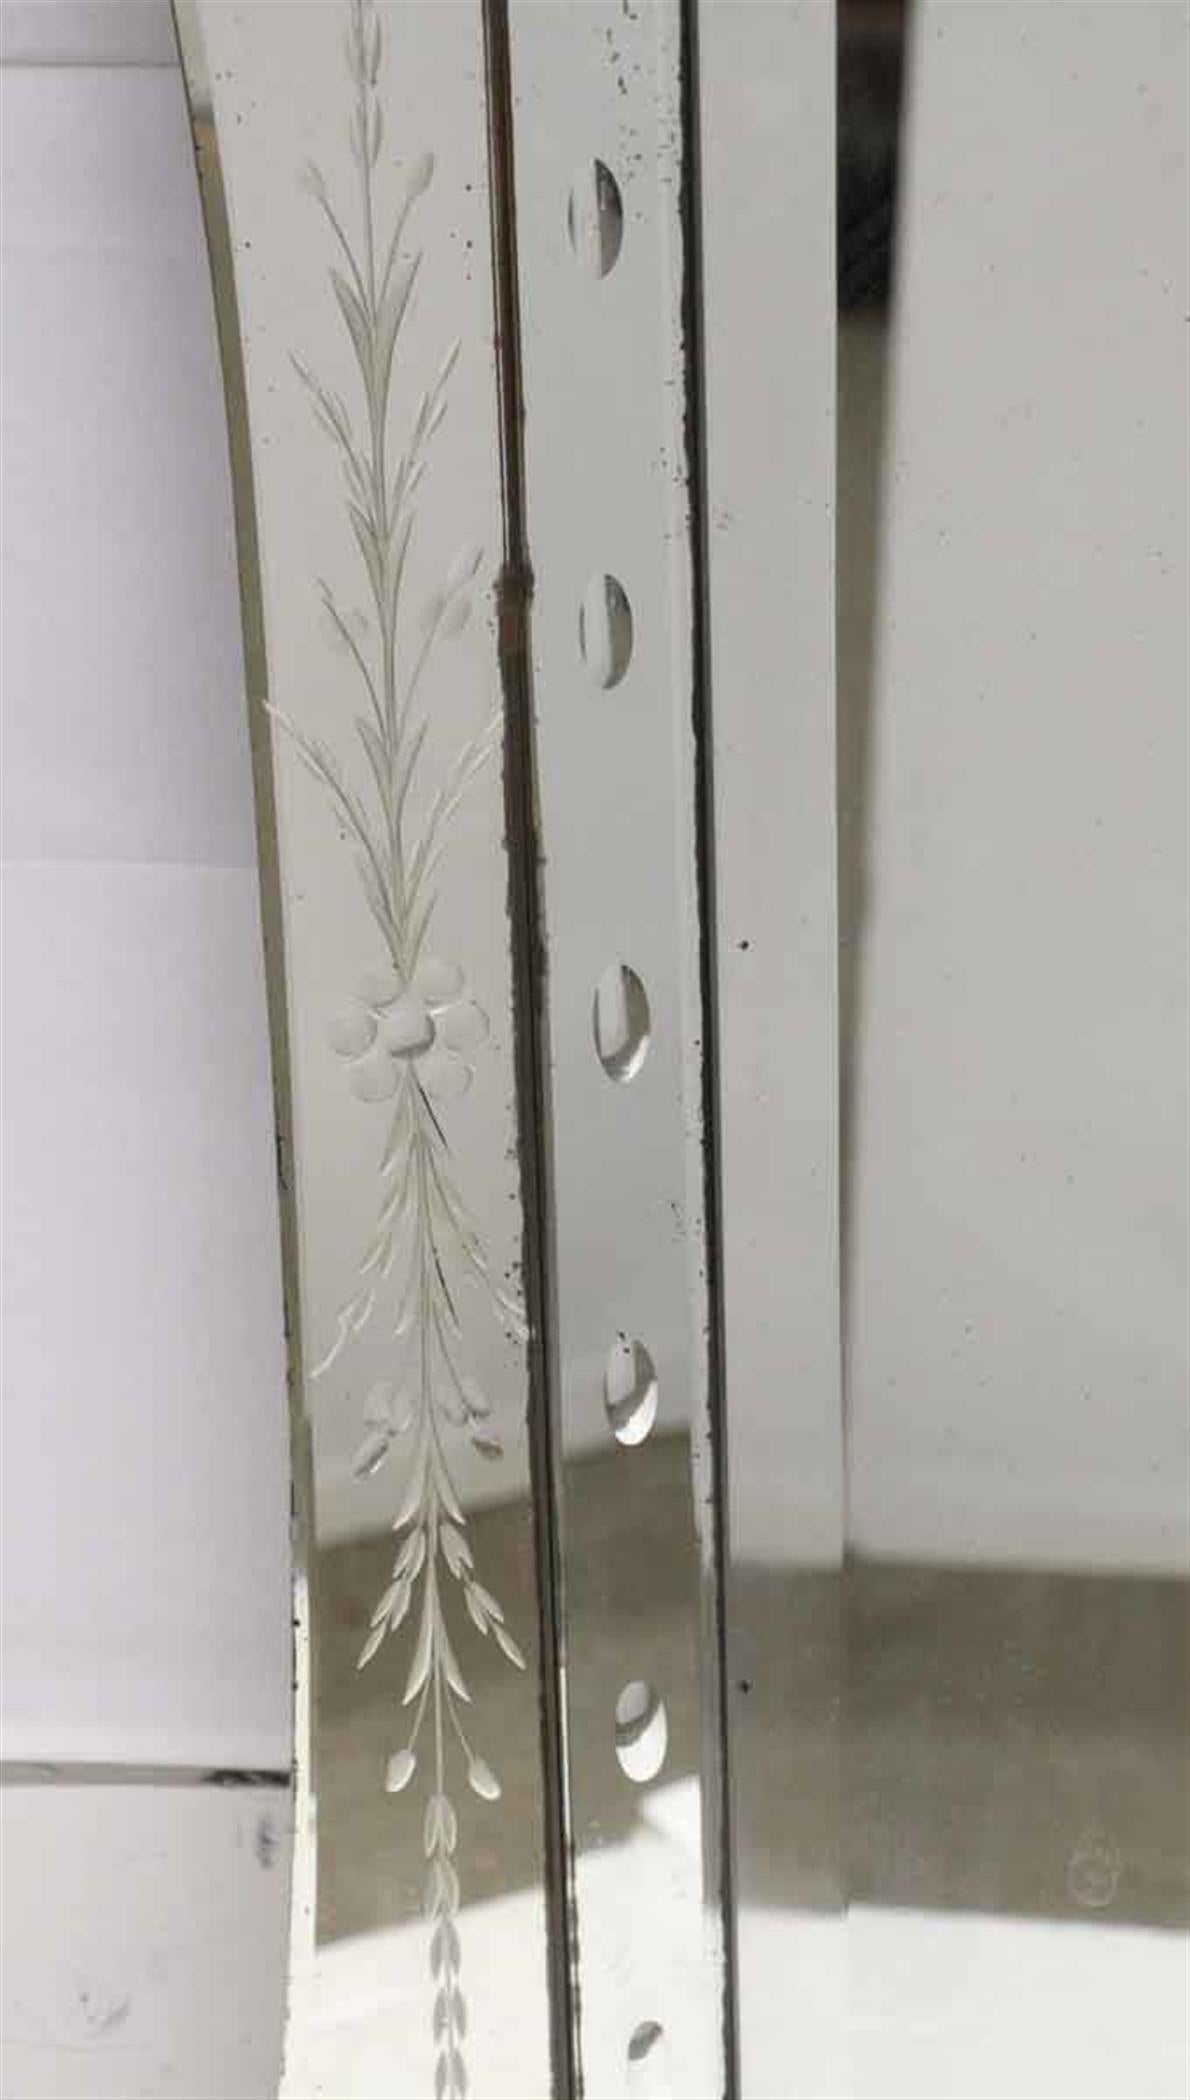 floral etched mirror